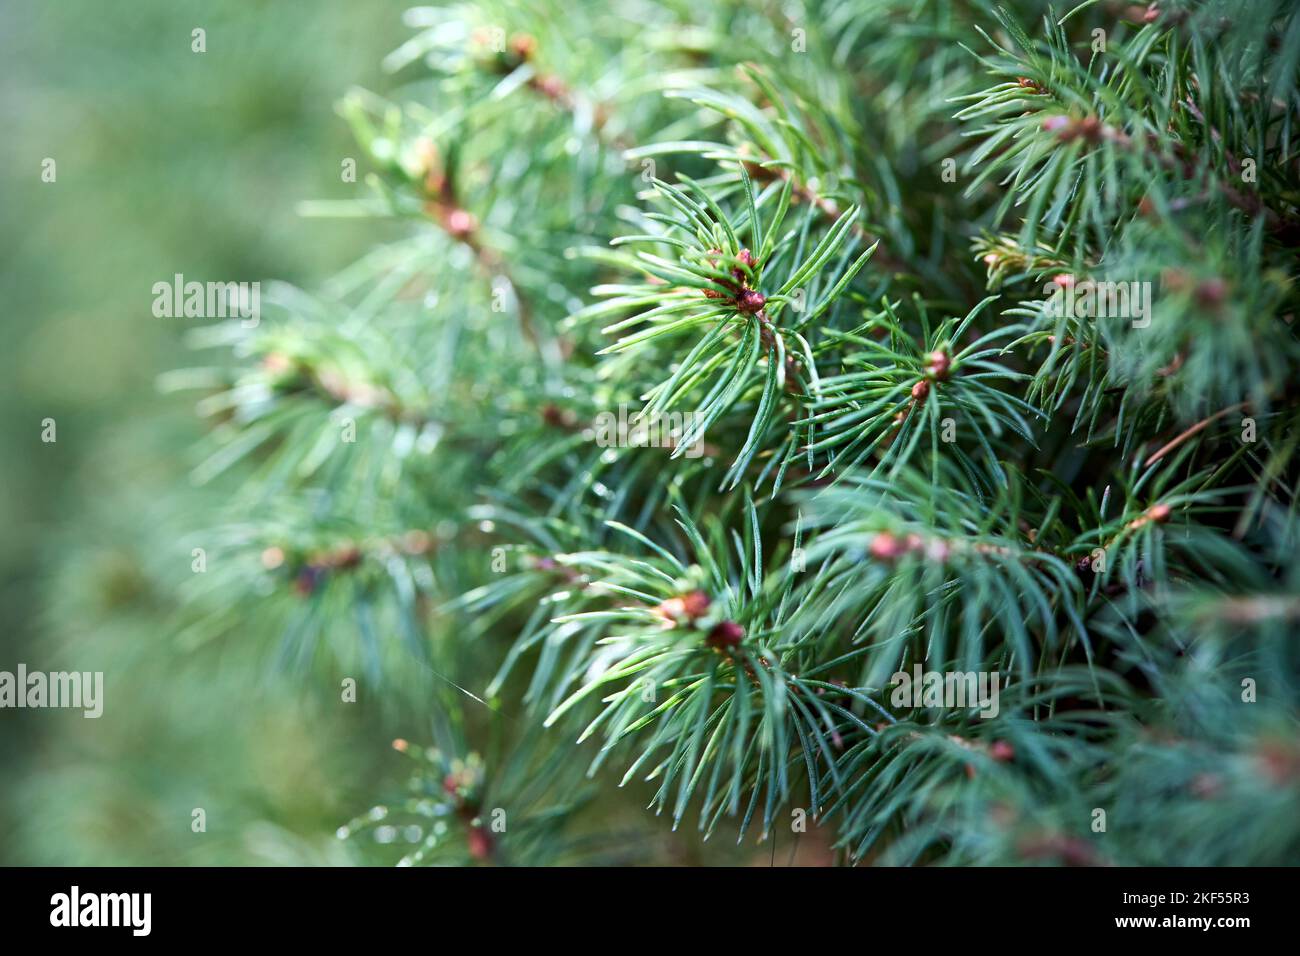 Sprouts shoots of Picea glauca, white spruce, Canadian , skunk cat Black Hills spruce western white Alberta white and Porsild spruce closeup with Stock Photo